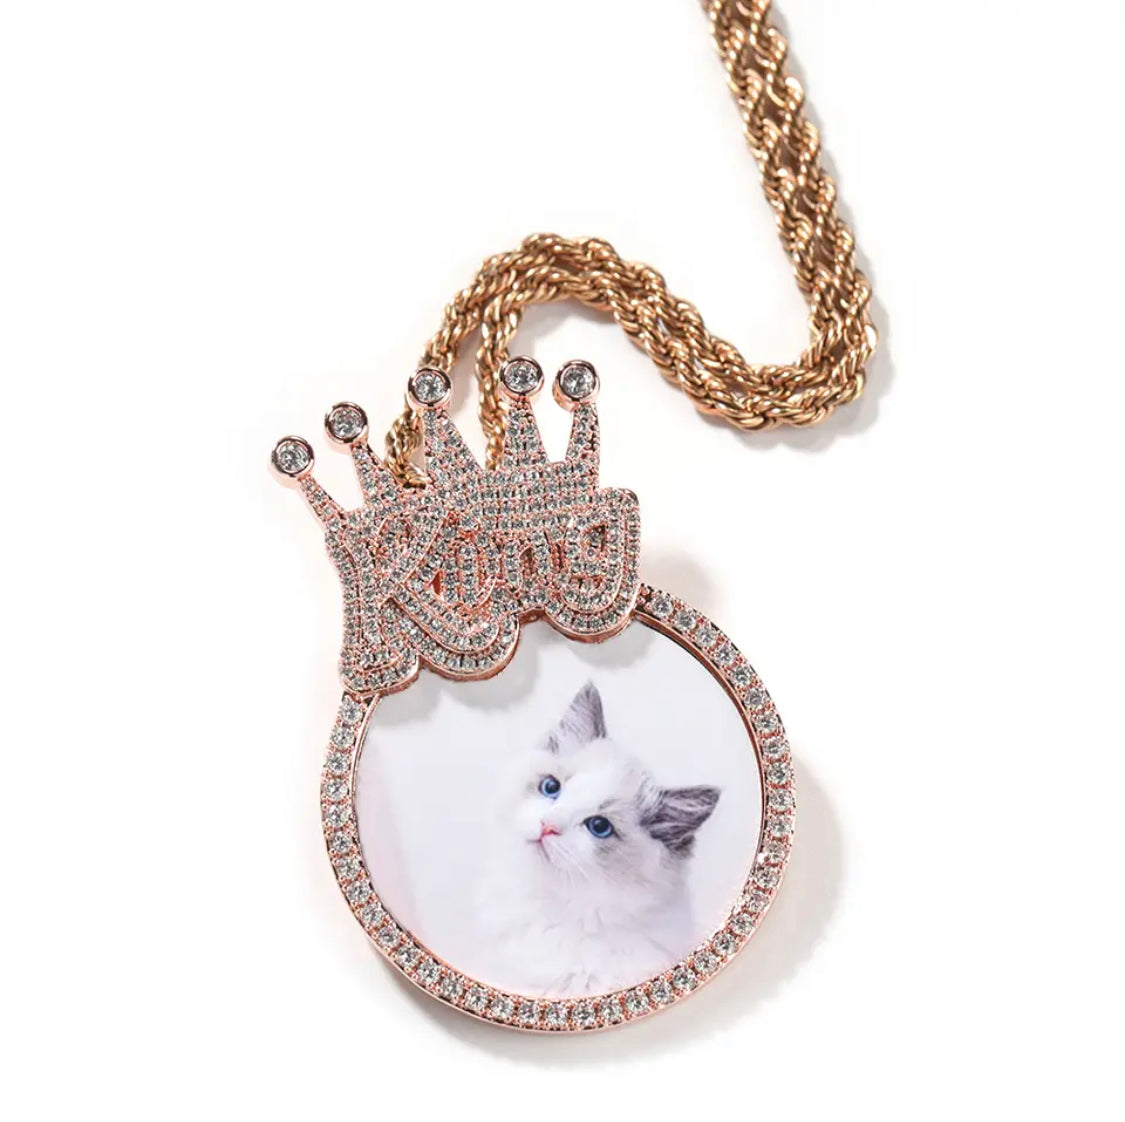 King photo pendent